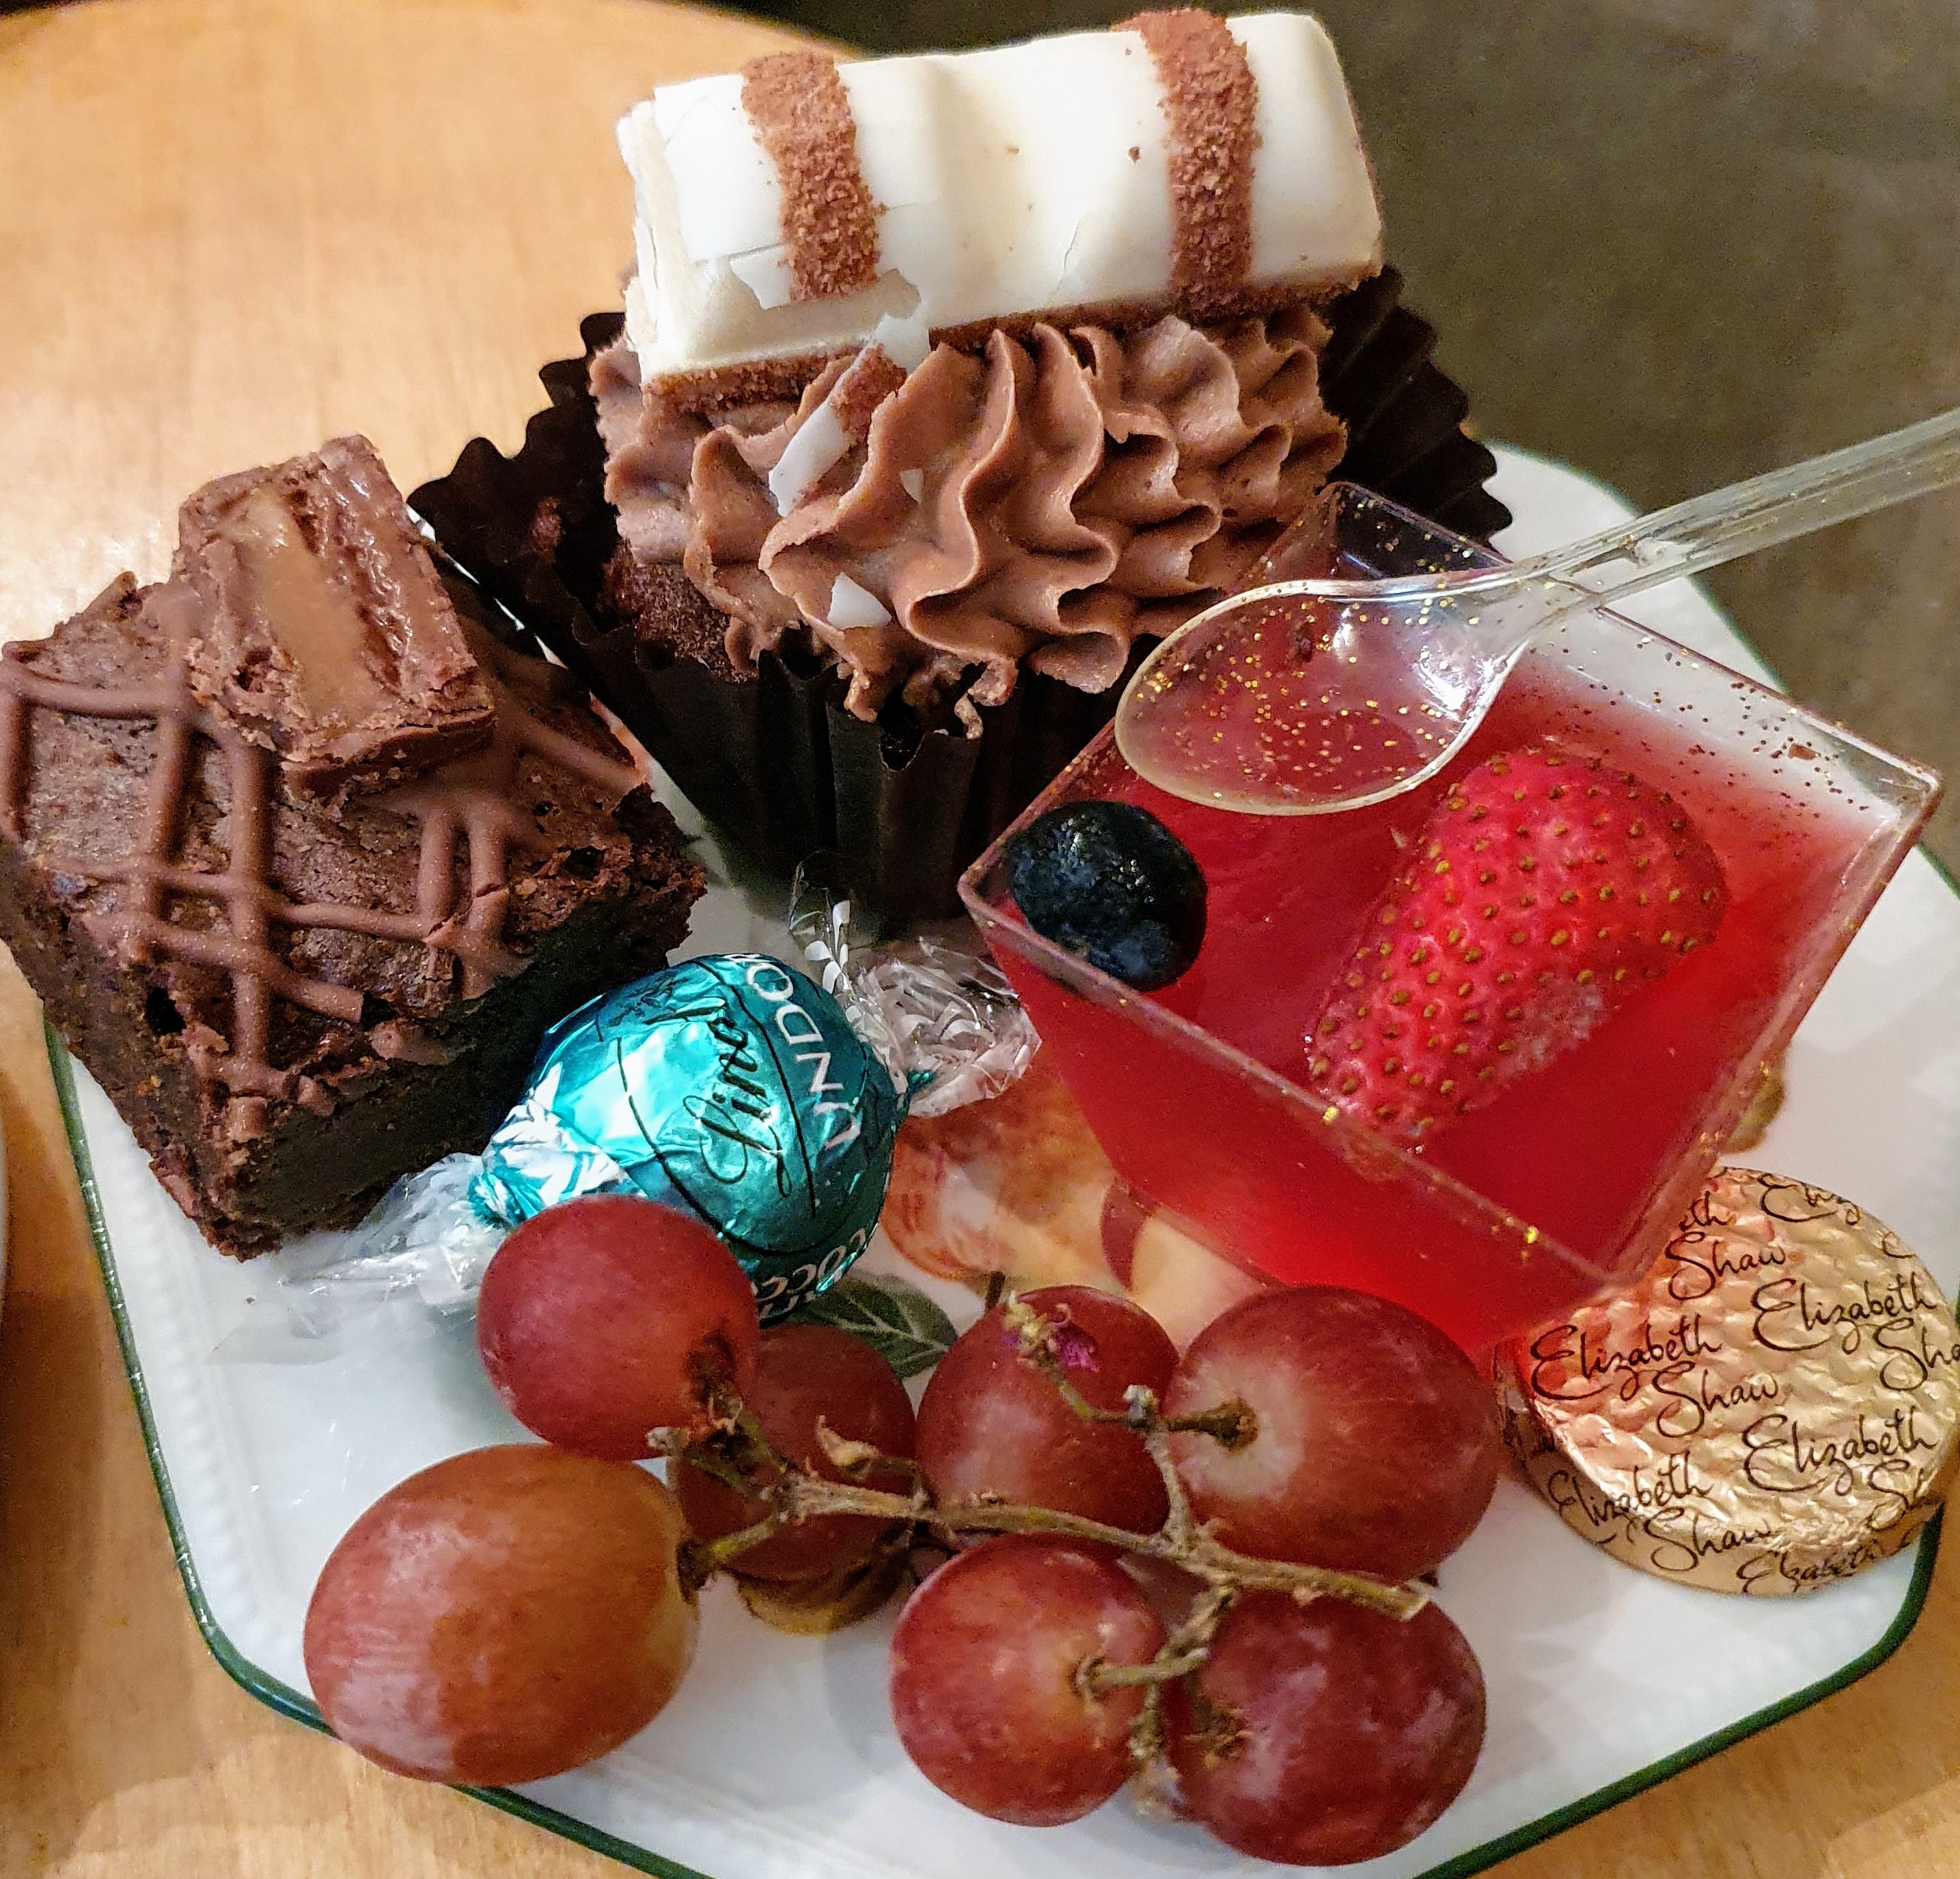 Takeaway afternoon tea with a cupcake, brownie, chocolates, grapes and jelly from Dolly Birds Mobile Catering, Staffordshire